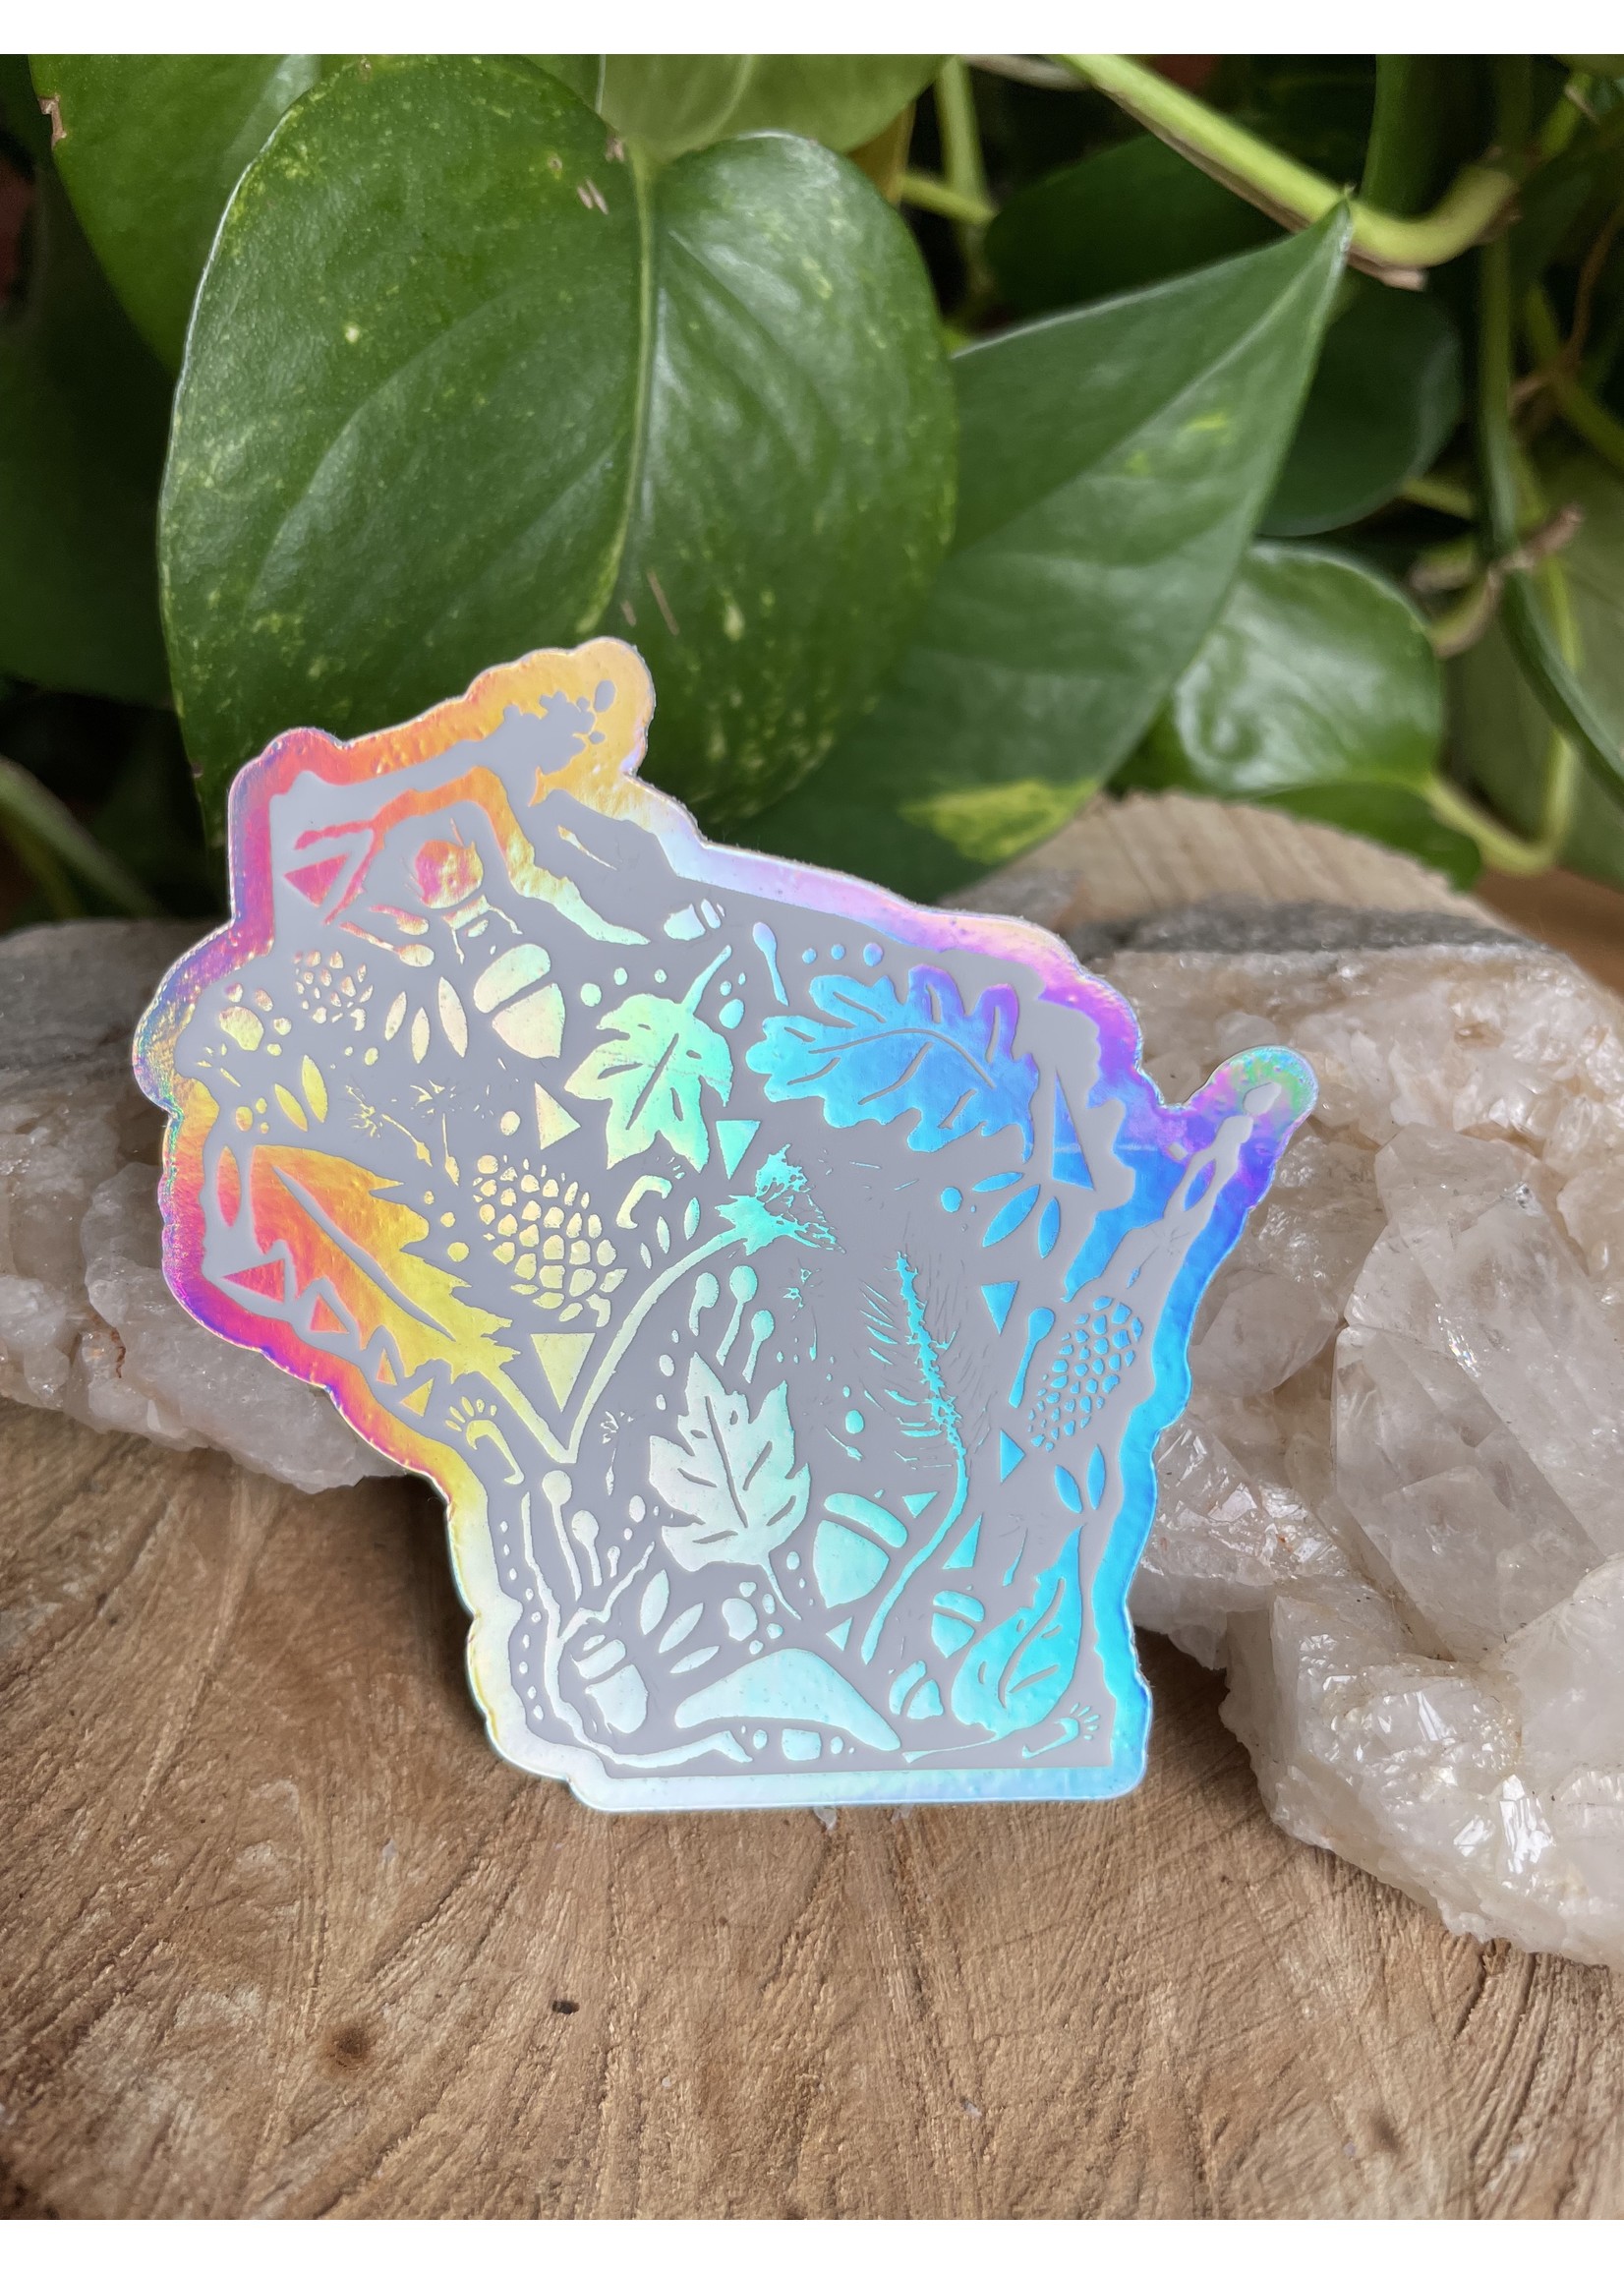 Tangled Up In Hue Sticker - WI Nature White Holographic